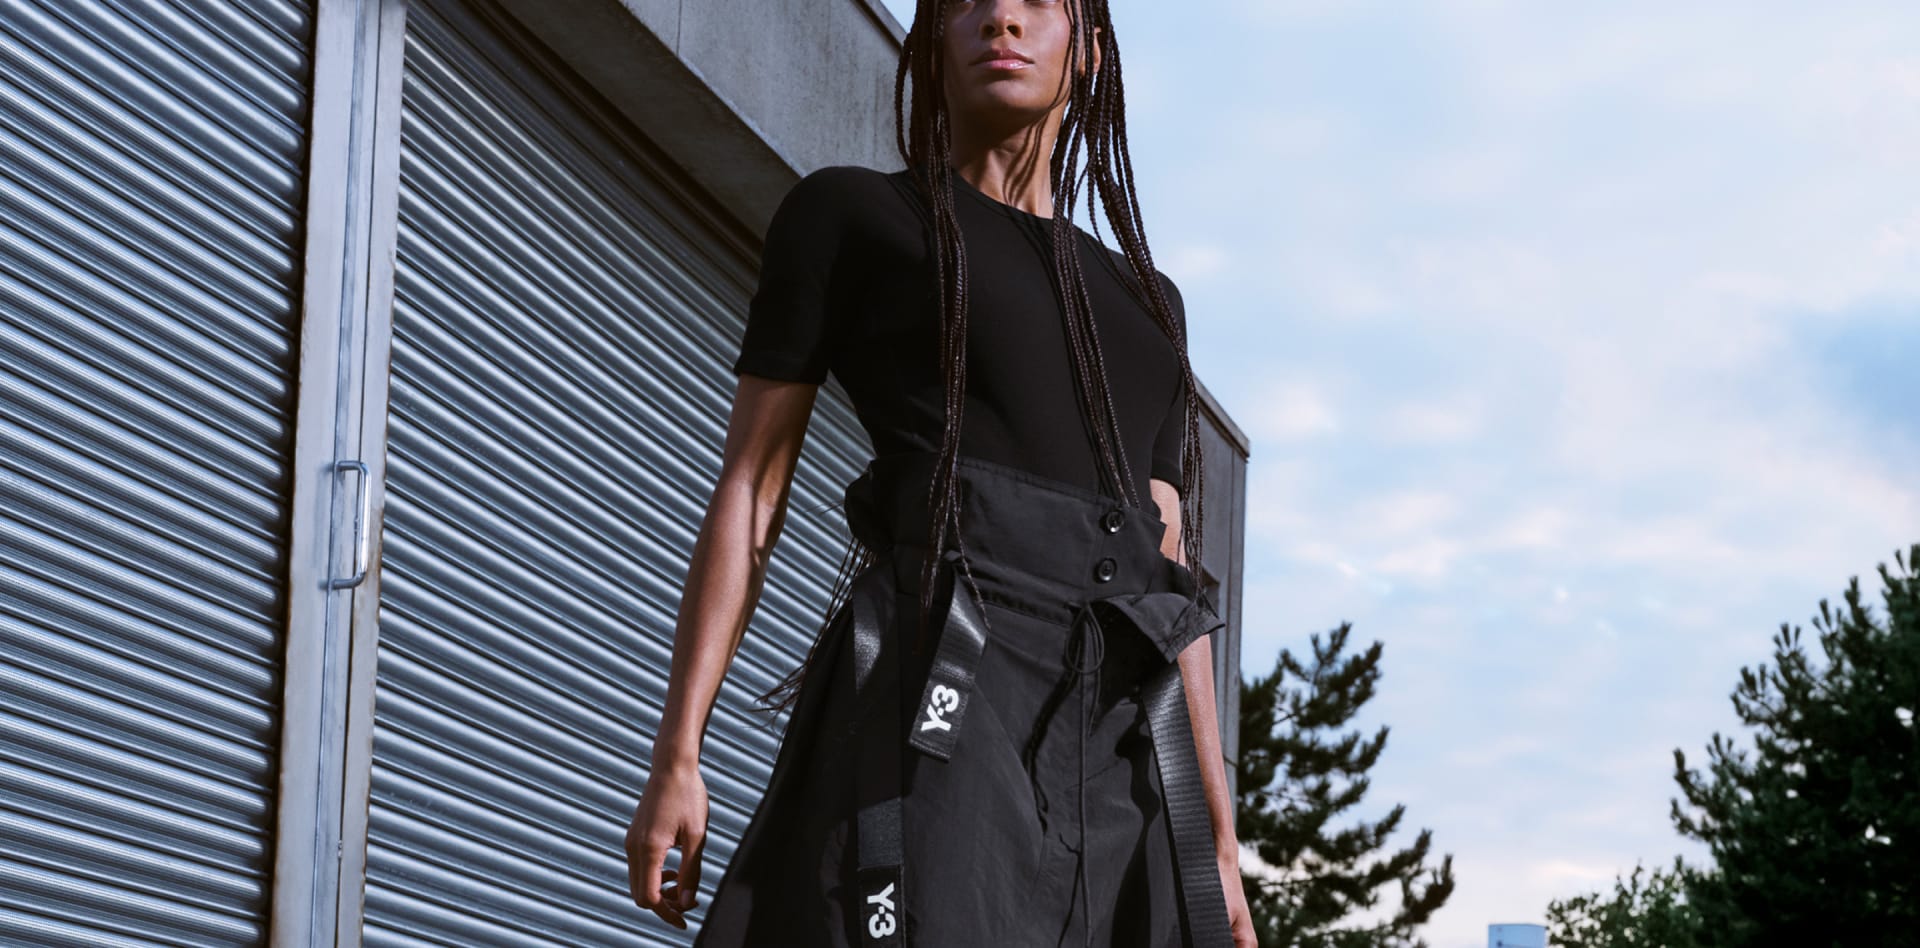 A woman with black braids wears all-black Y-3 apparel while posing in the city.